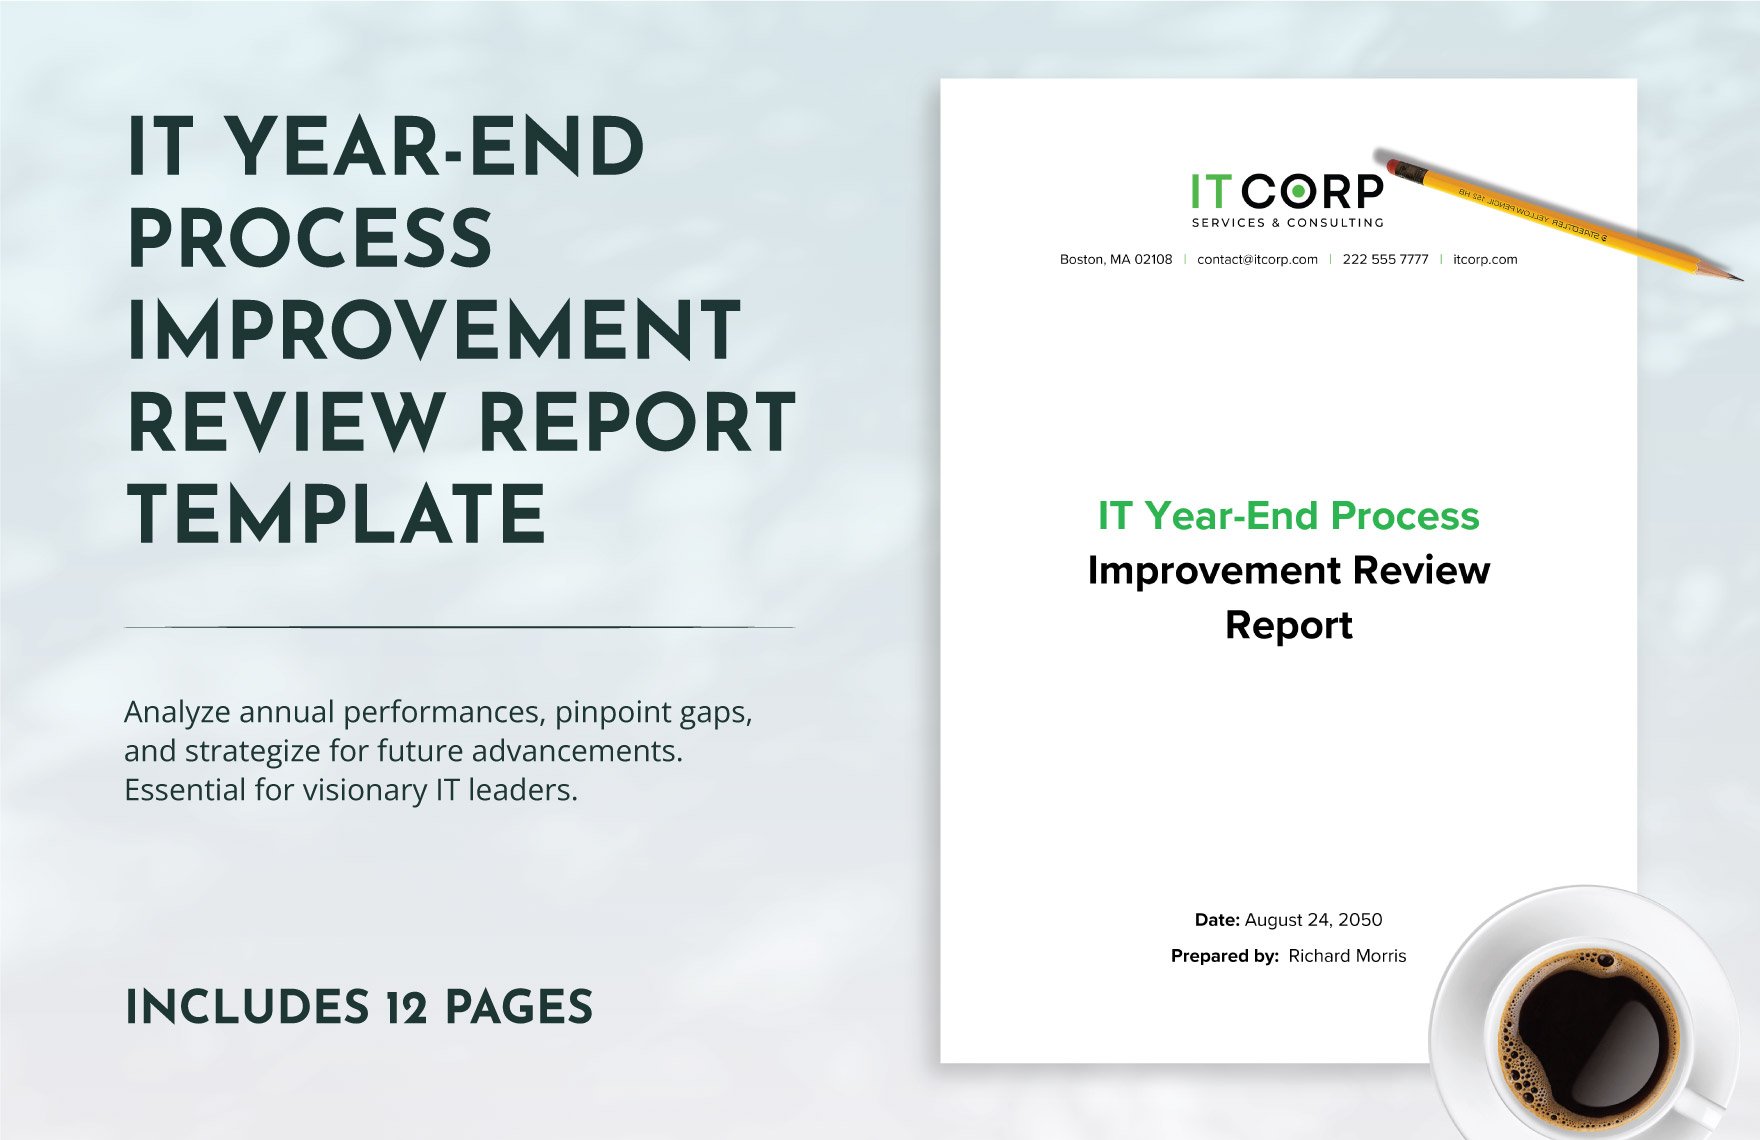 IT Year-end Process Improvement Review Report Template